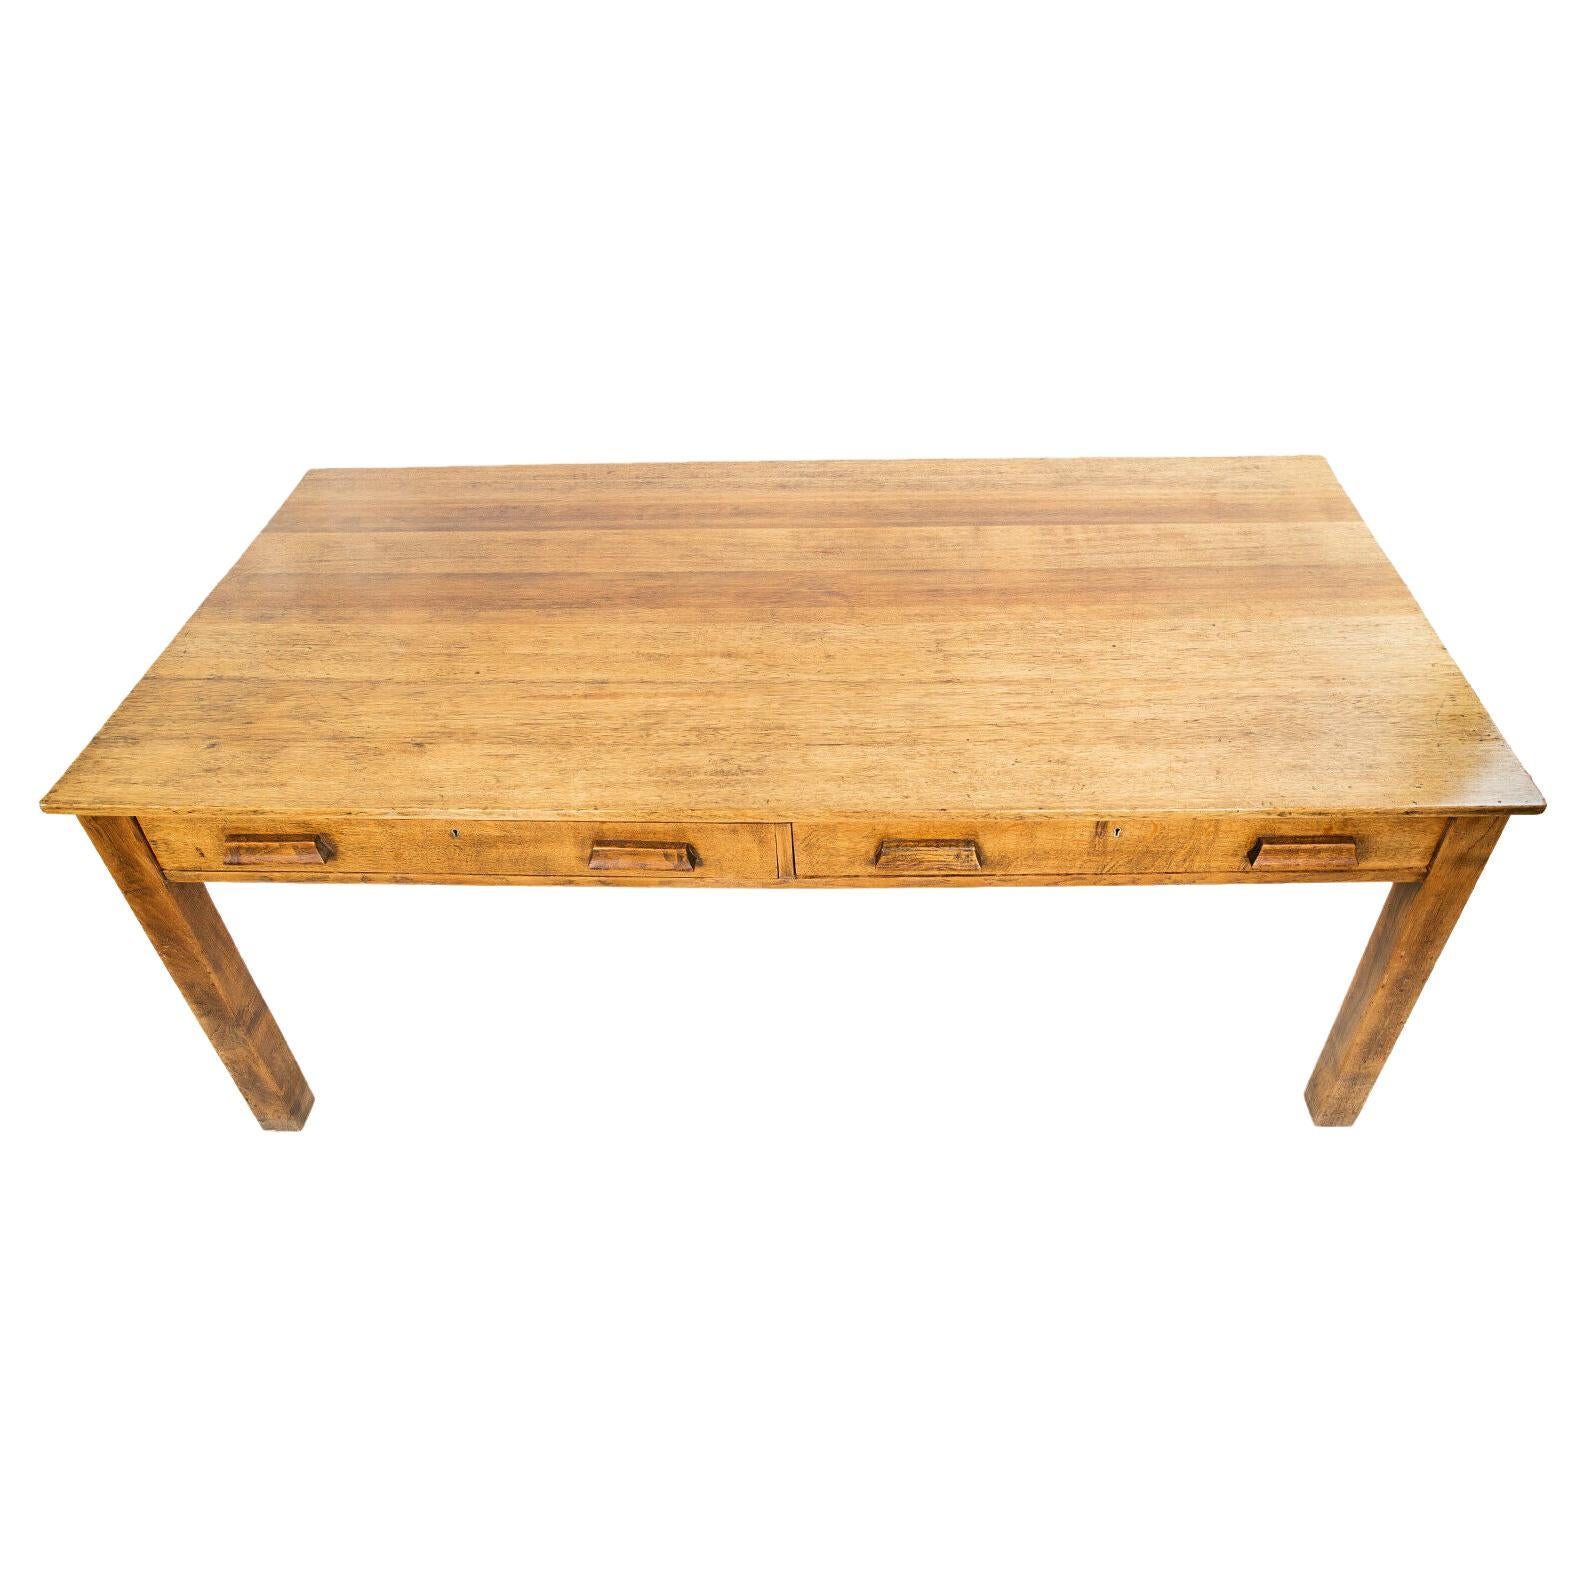 Large Farmhouse table

A large impressive kitchen prep centre table from the early 20th century. 

Sold oak with square legs, with twin drawers below a plank top.

Dimensions (cm): 

76H x 183W x 90D

Condition:

Showing wonderful